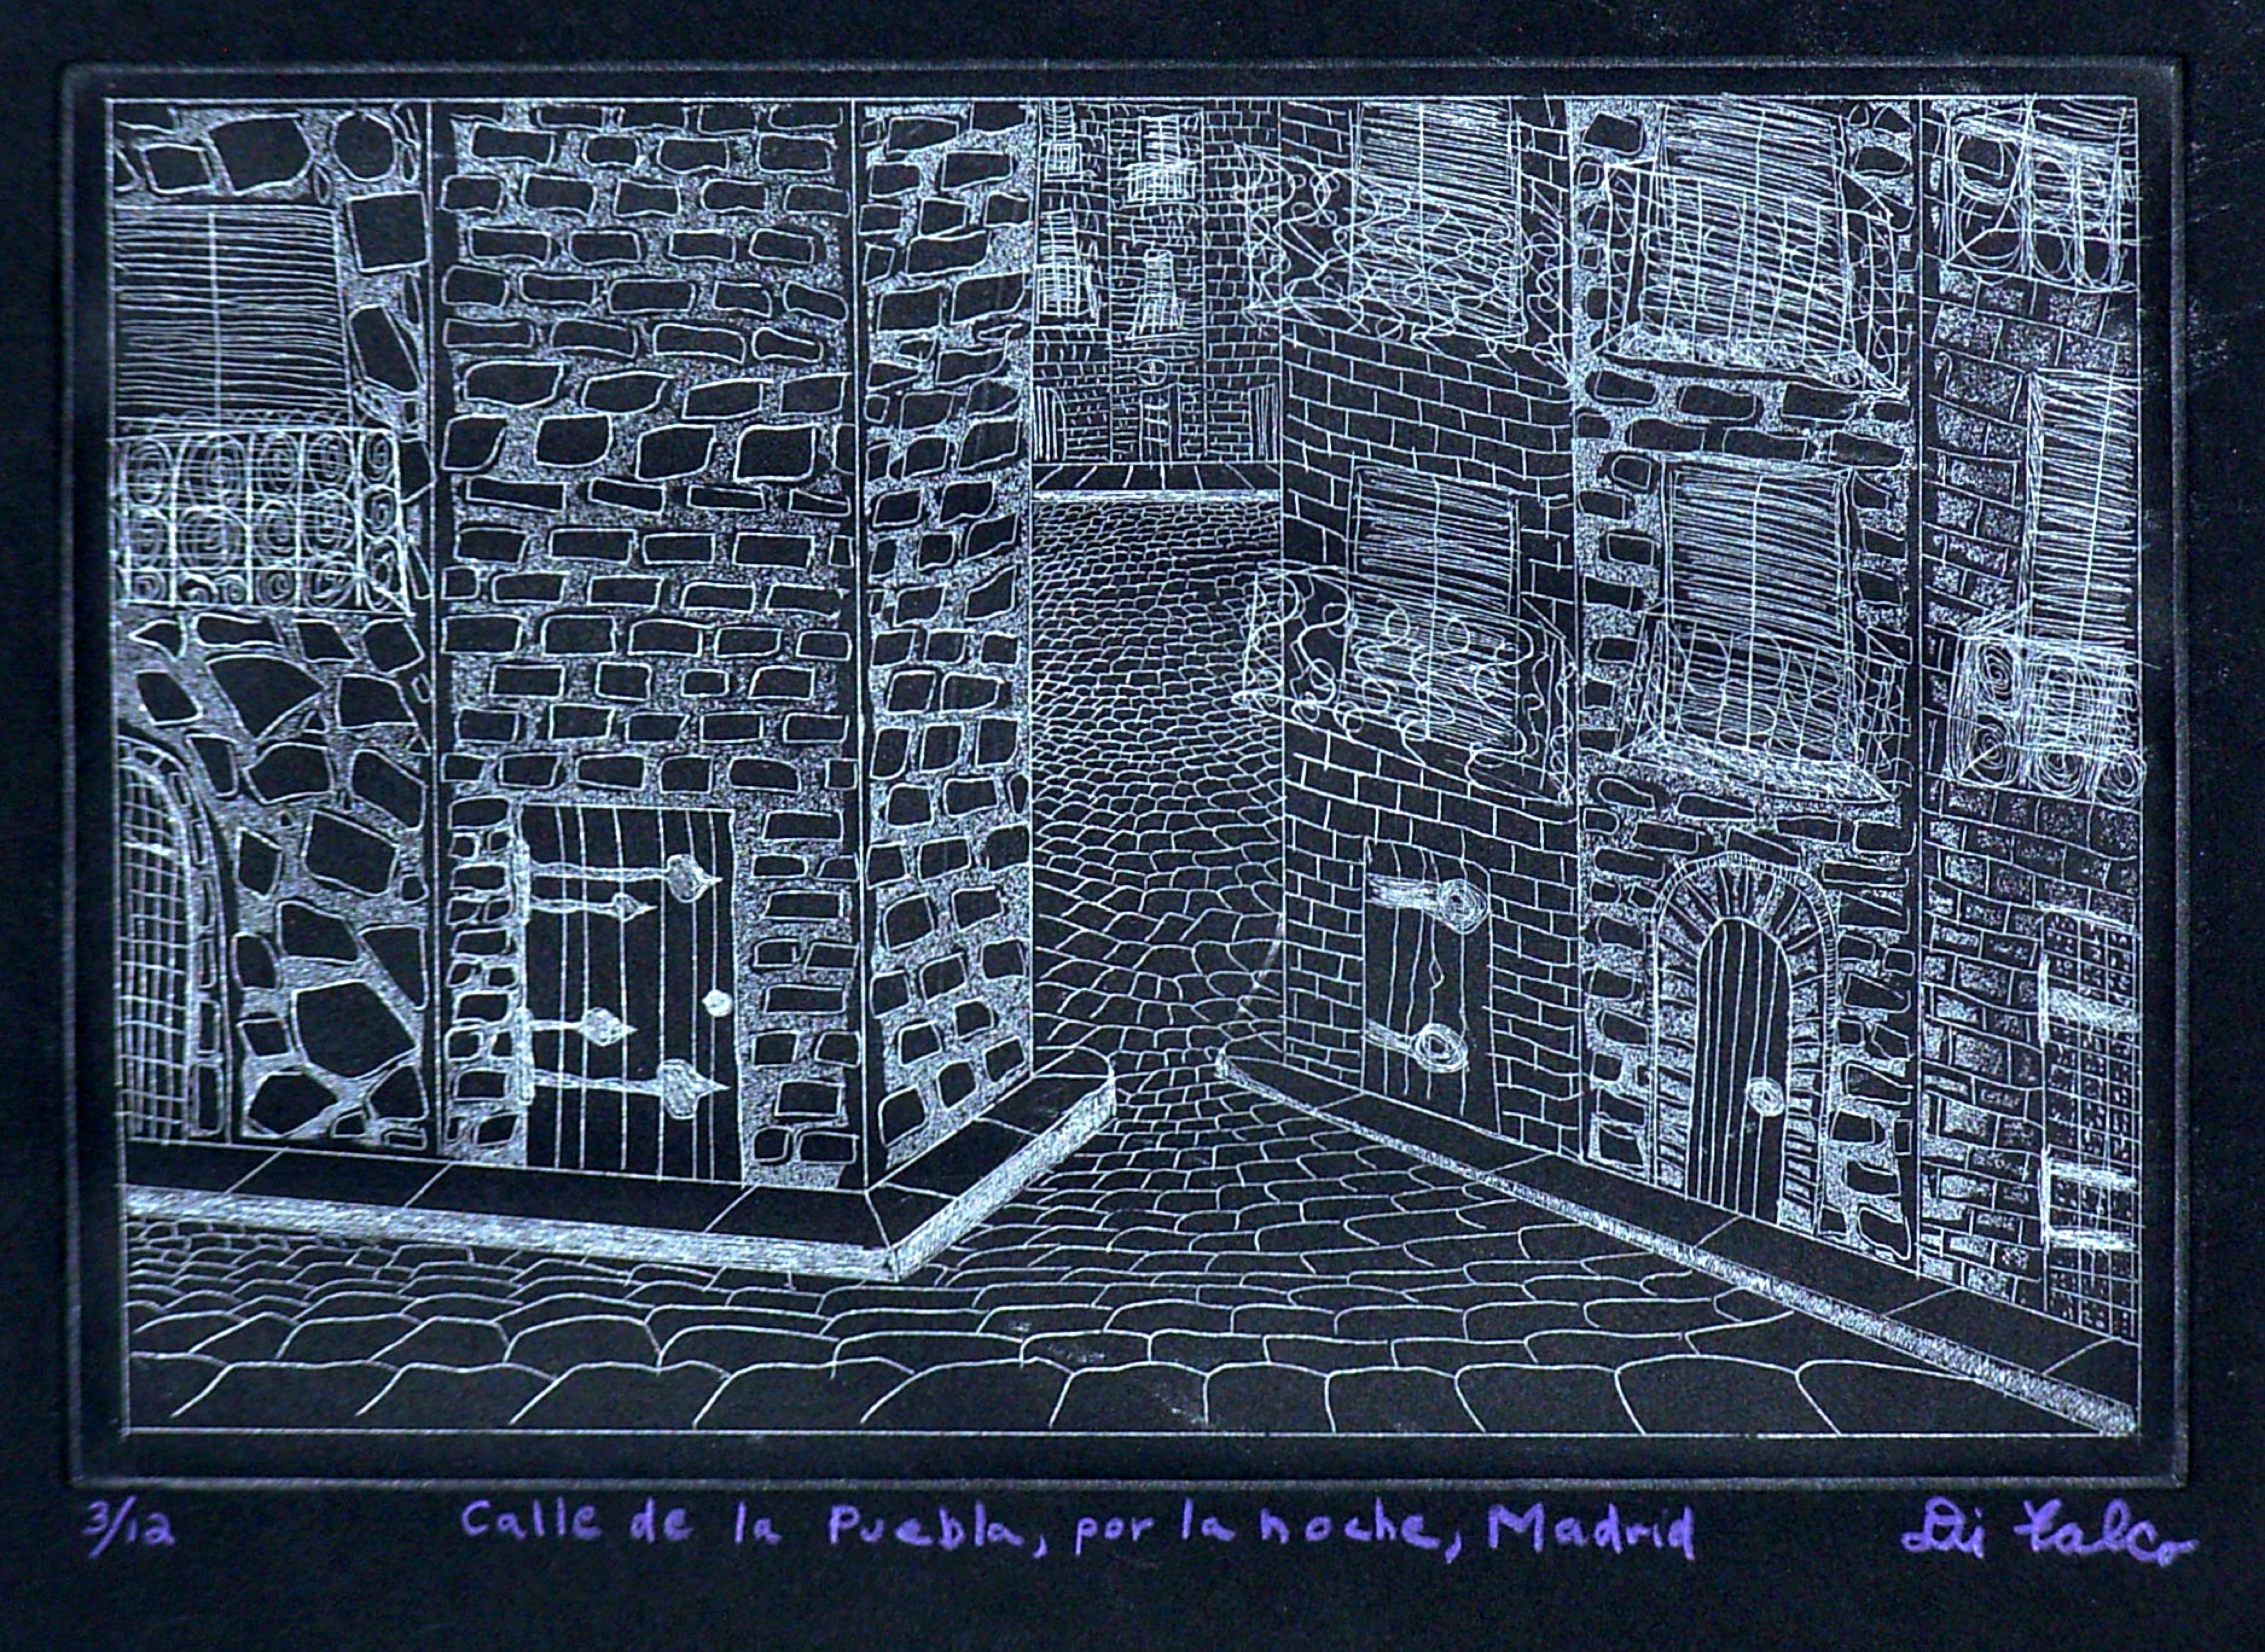 Jerry  Di Falco: 'Madrid Street at Night', 2009 Etching, Urban. This is an edition of twelve silver ink on black paper prints of the print entitled, Calle de la Puebla, El Centro, Madrid, or Street of the Town, Madrids Central District. I hand printed and published this edition at The Center for Works on Paper in Philadelphia, Pennsylvania, USA. Please ...